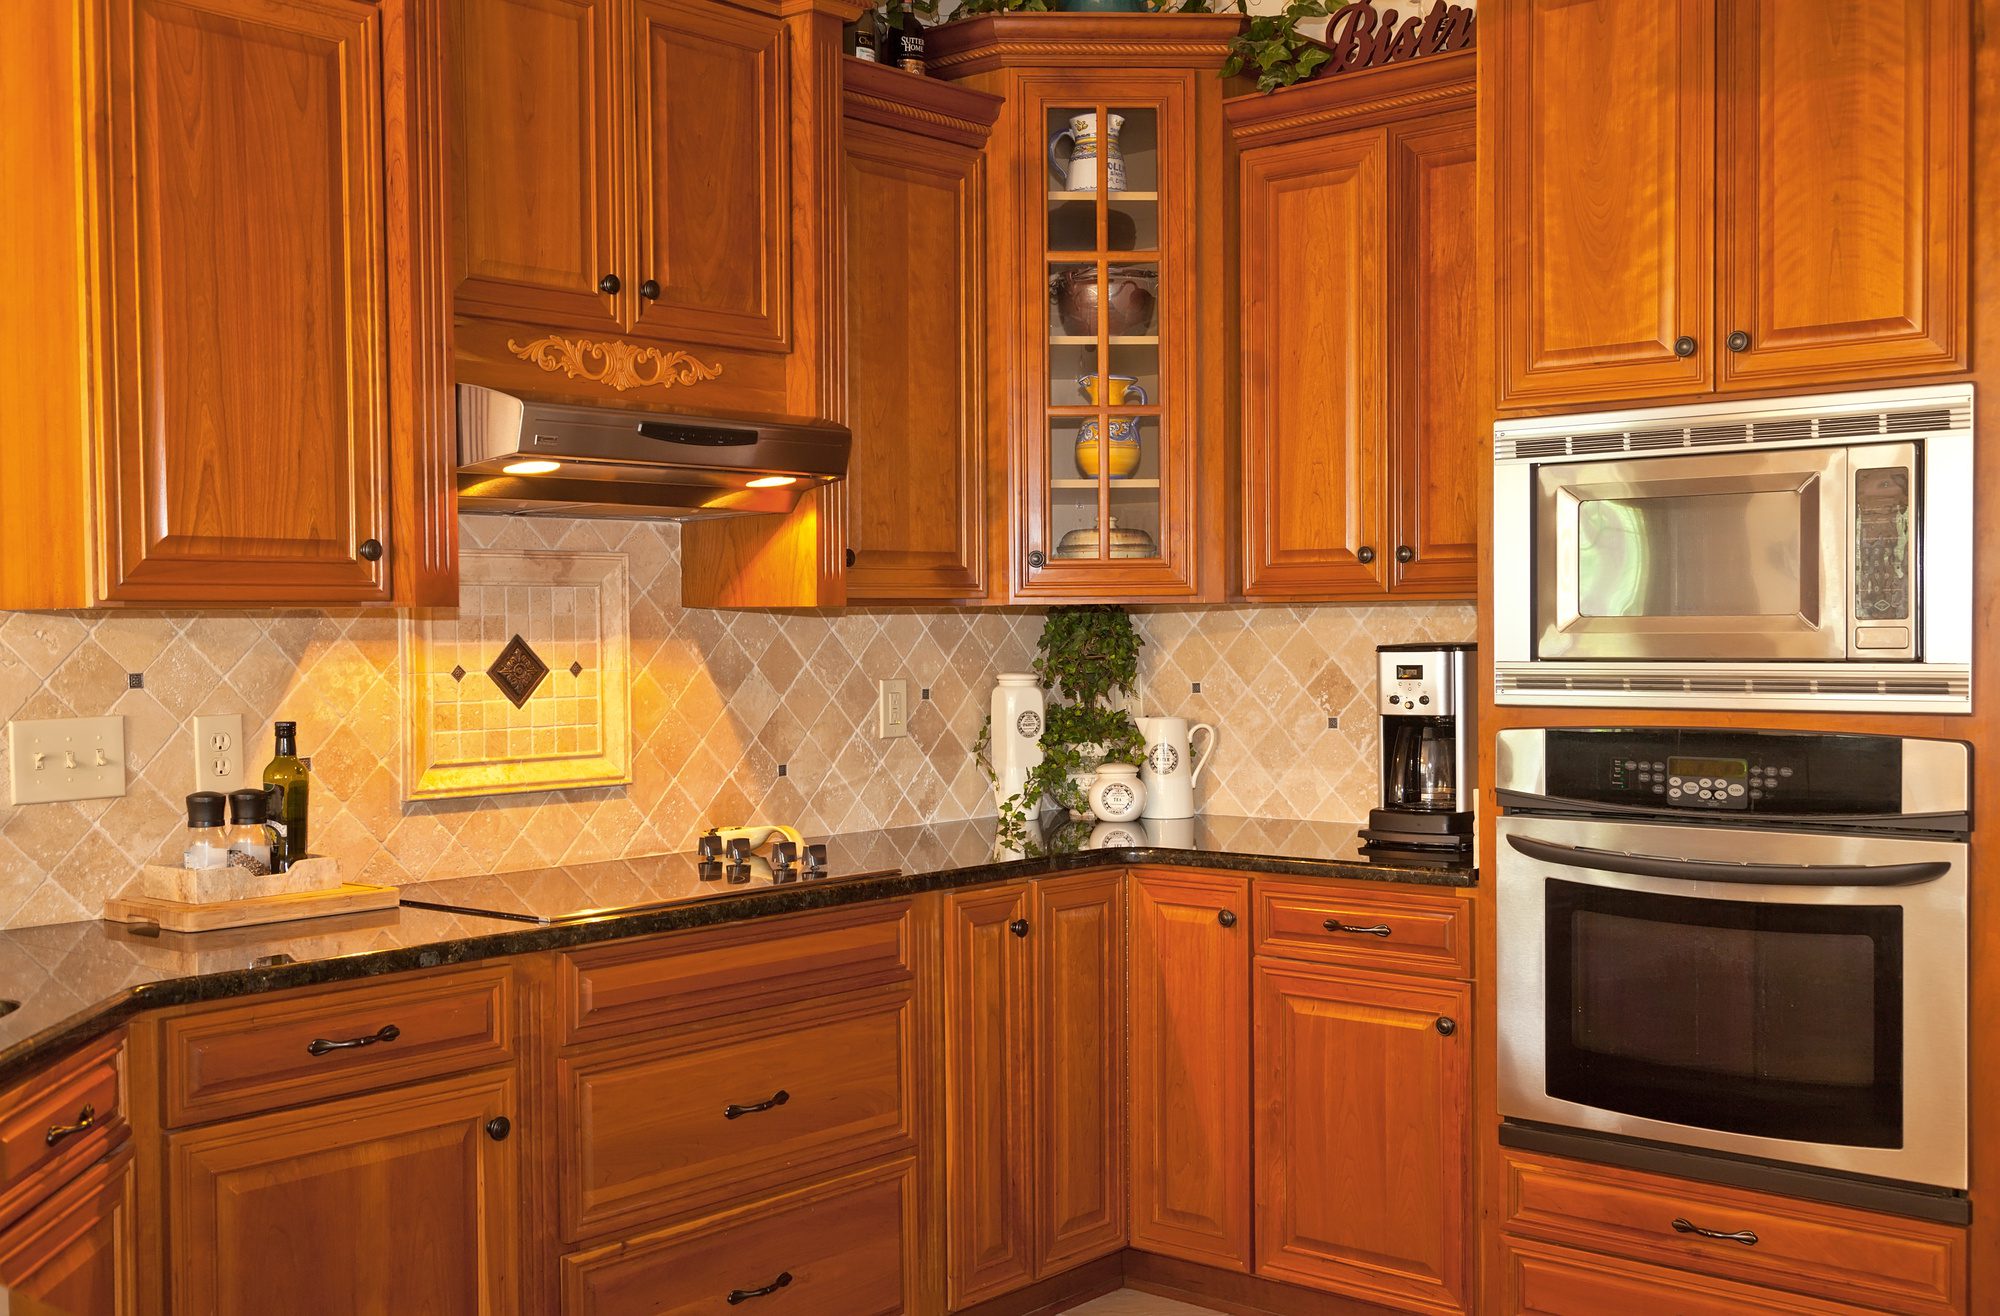 Kitchen Cabinet Dimensions Your Guide, How Deep Are Base Cabinets